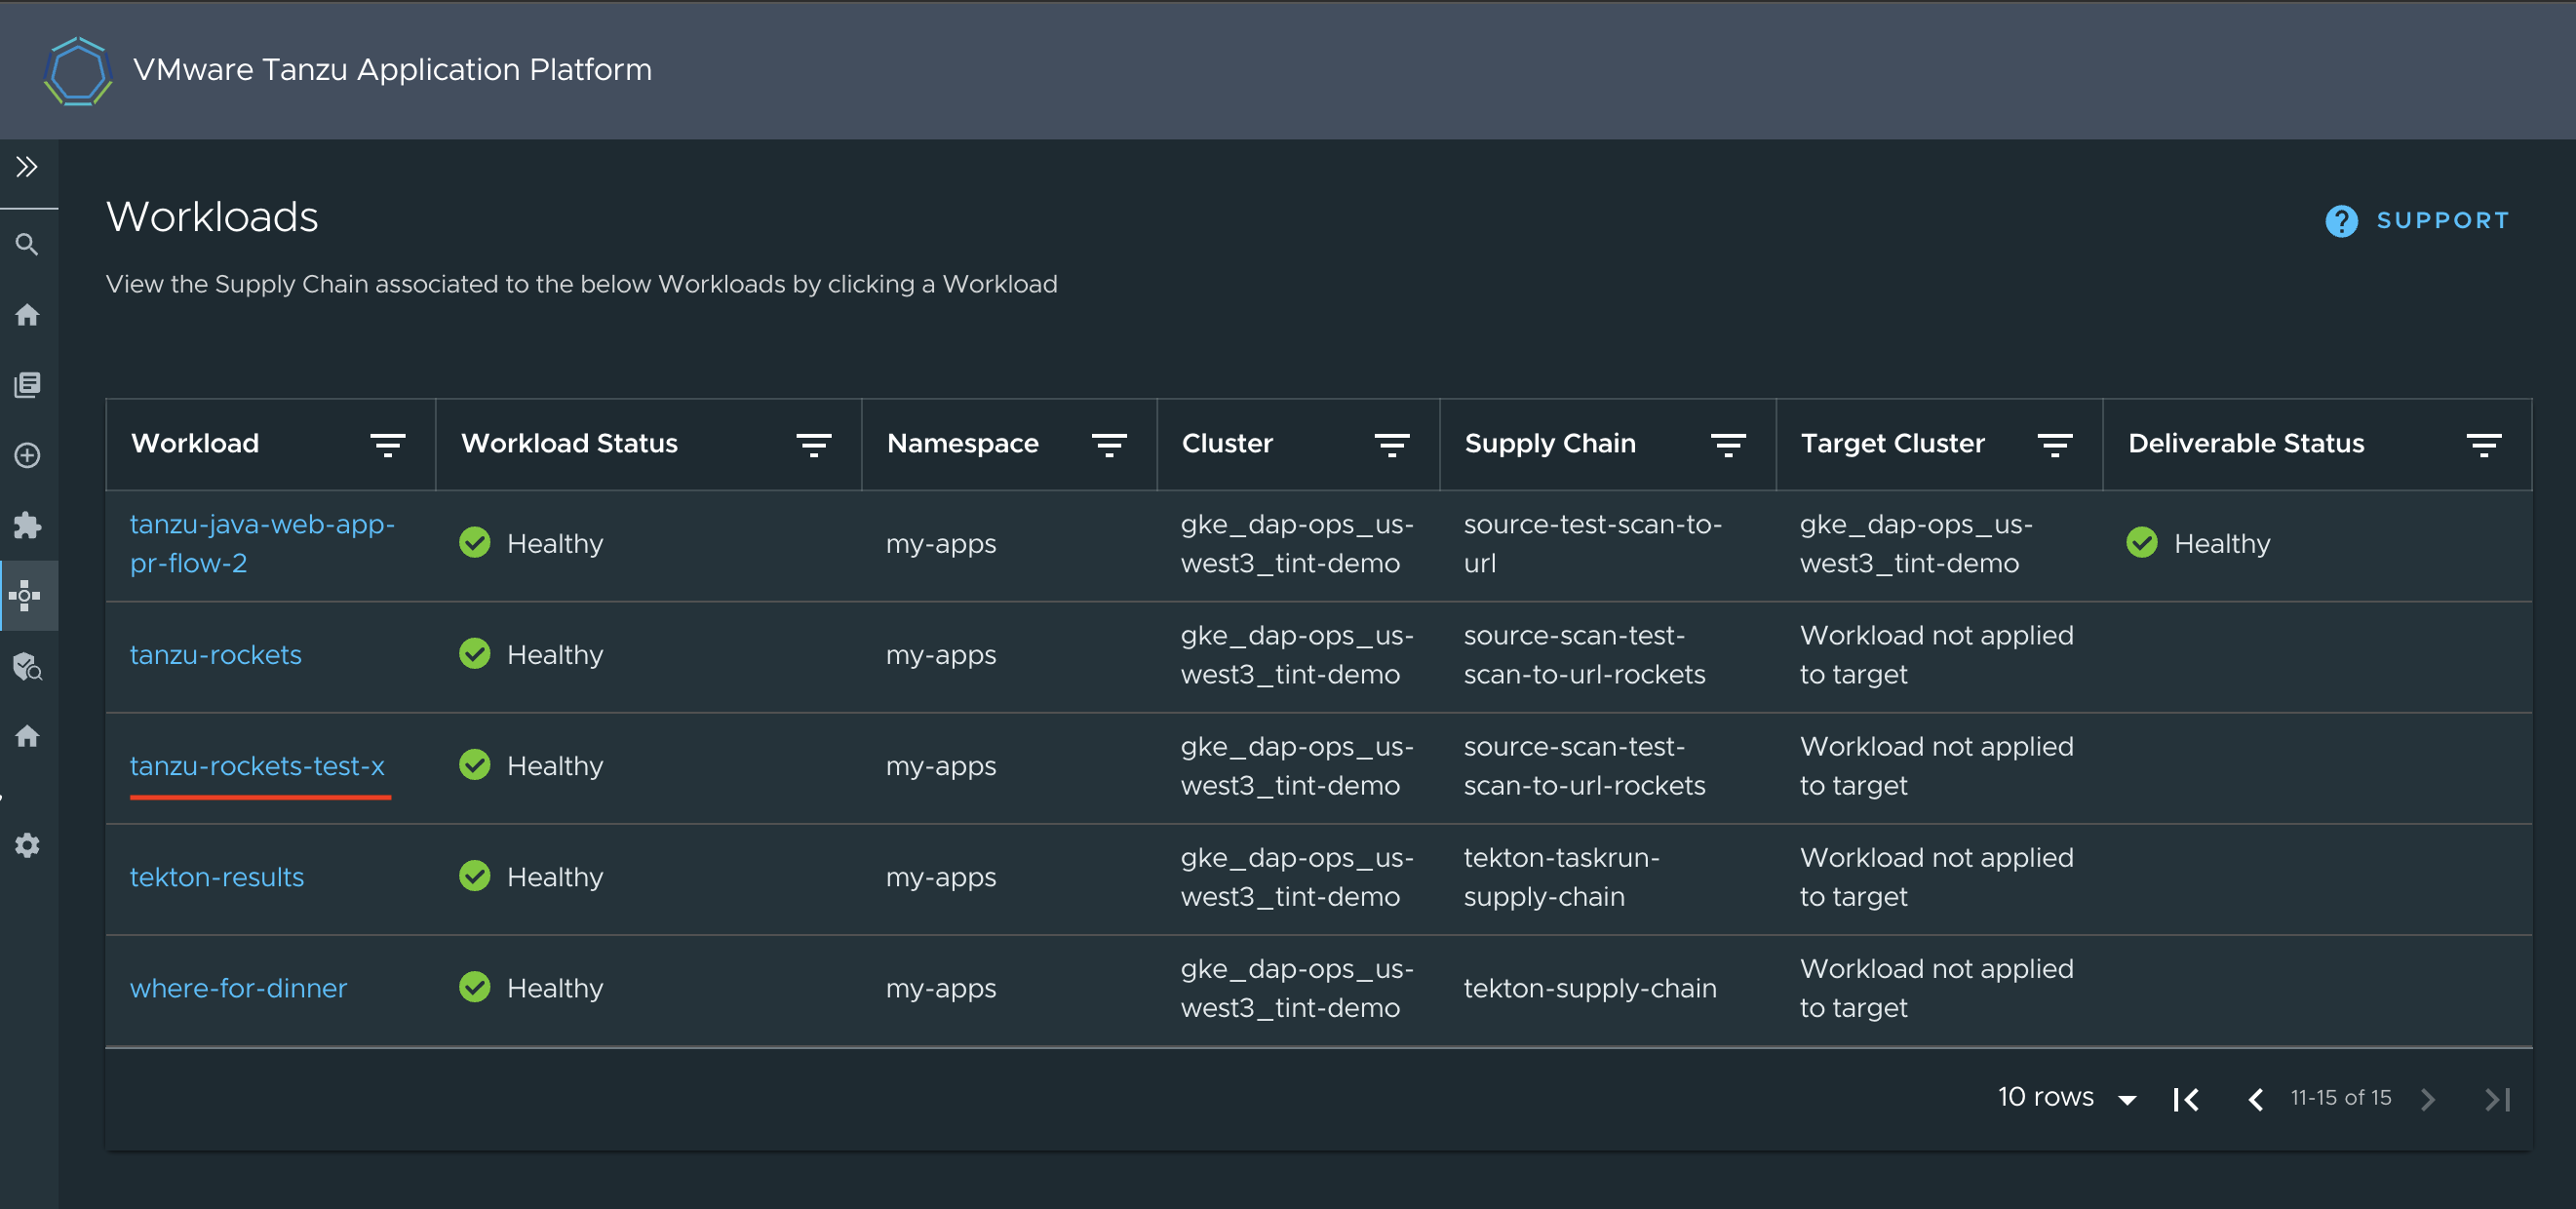 Screenshot of Workloads list with the tanzu-rockets-x workload listed.